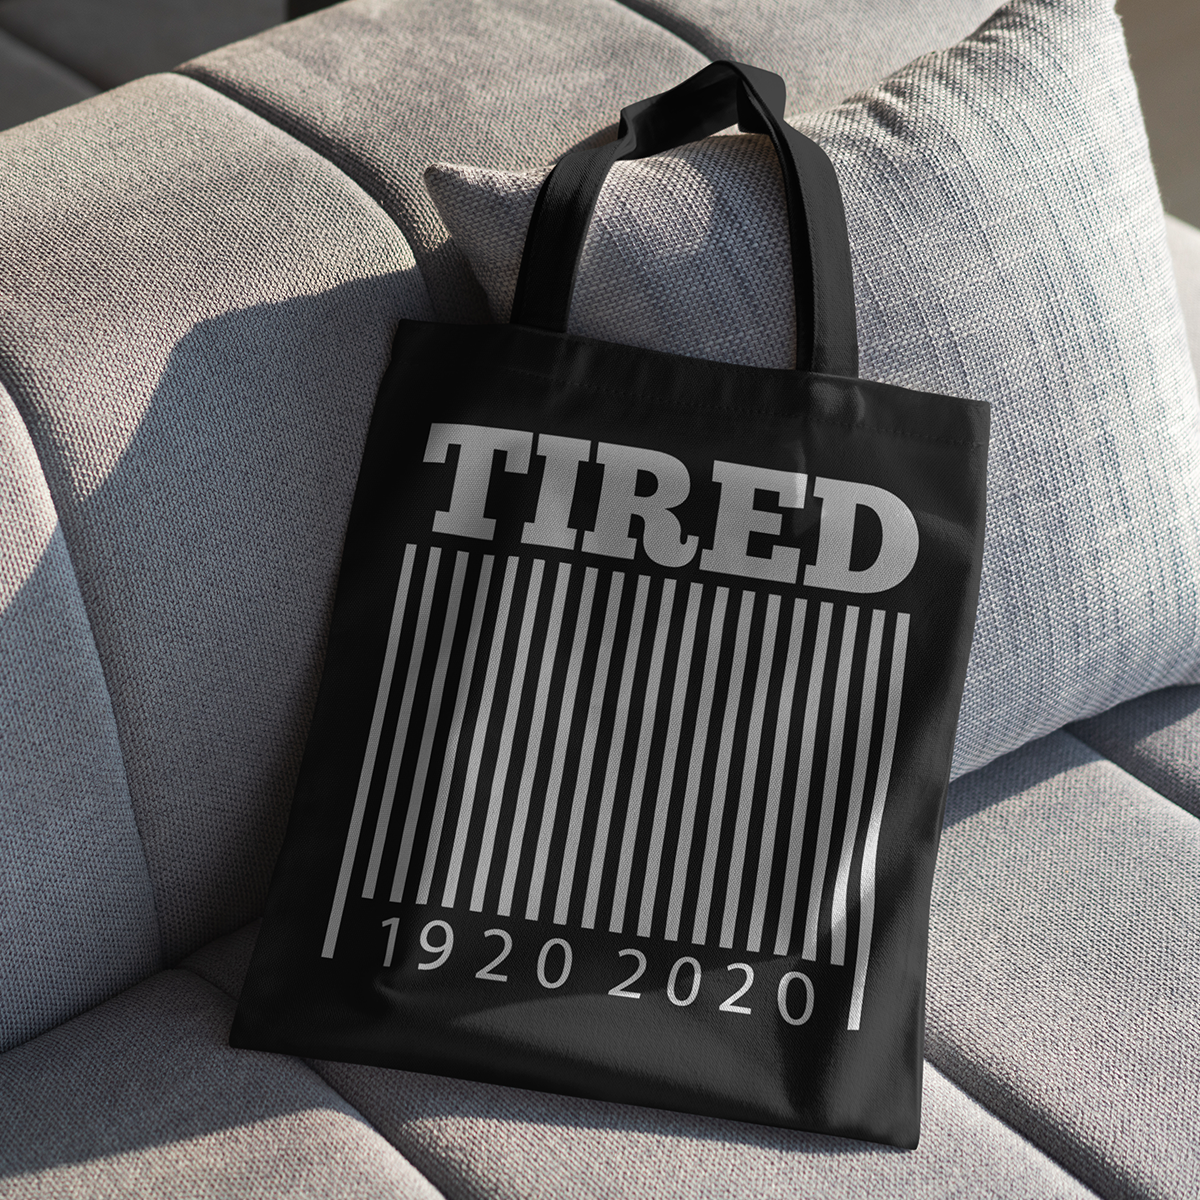 TIRED Tote Bag